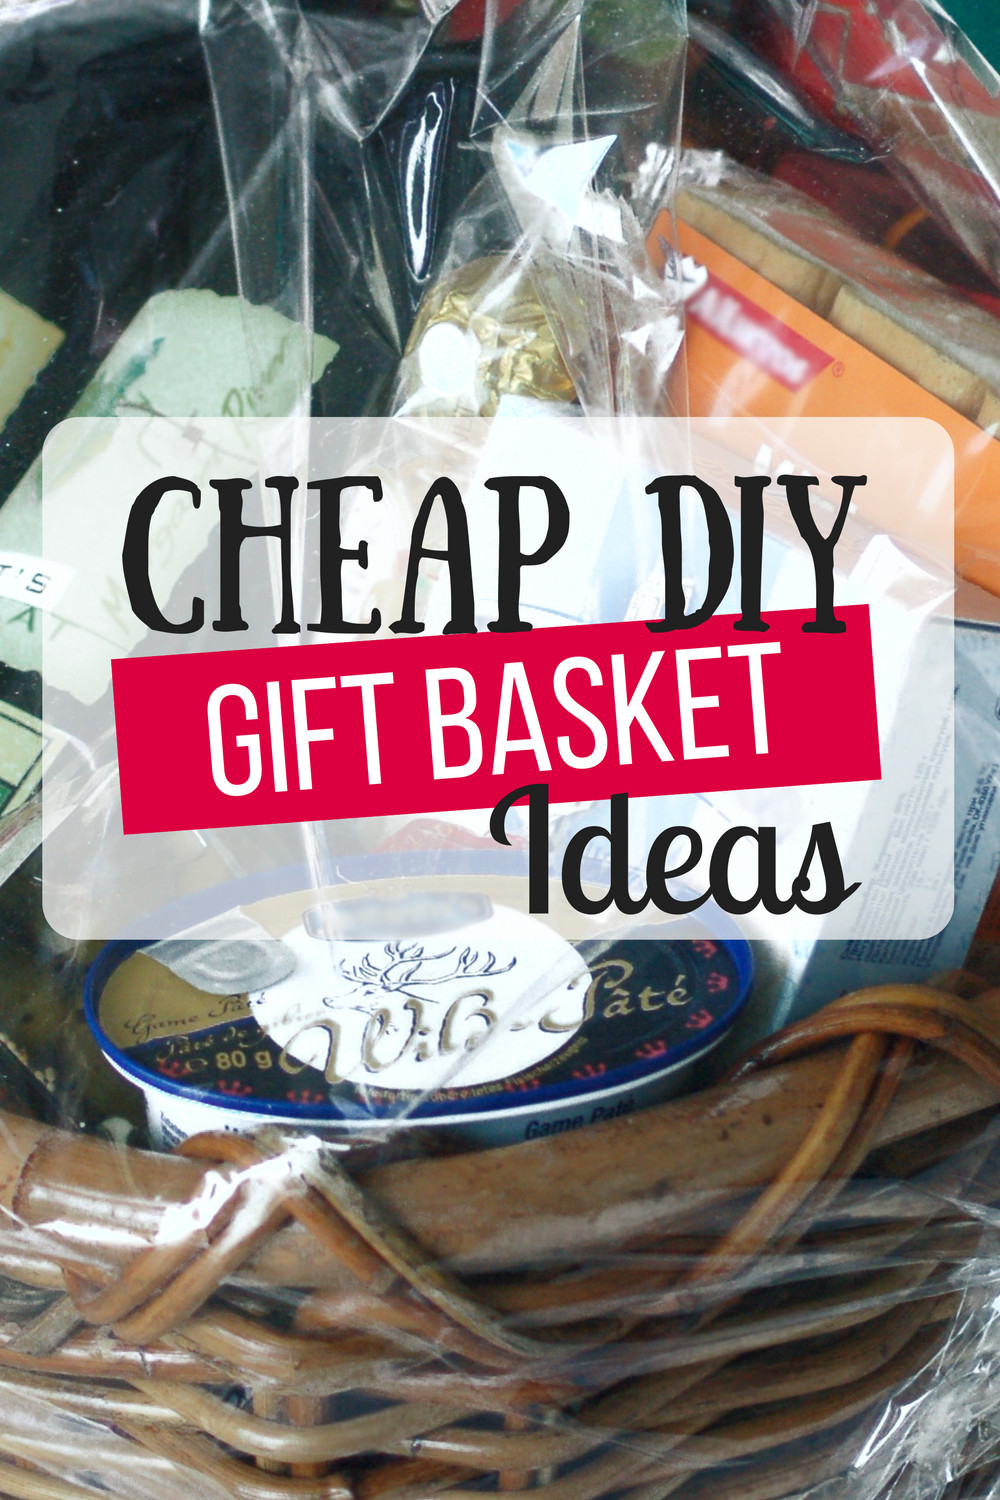 Family Themed Gift Basket Ideas
 Cheap DIY Gift Baskets The Busy Bud er